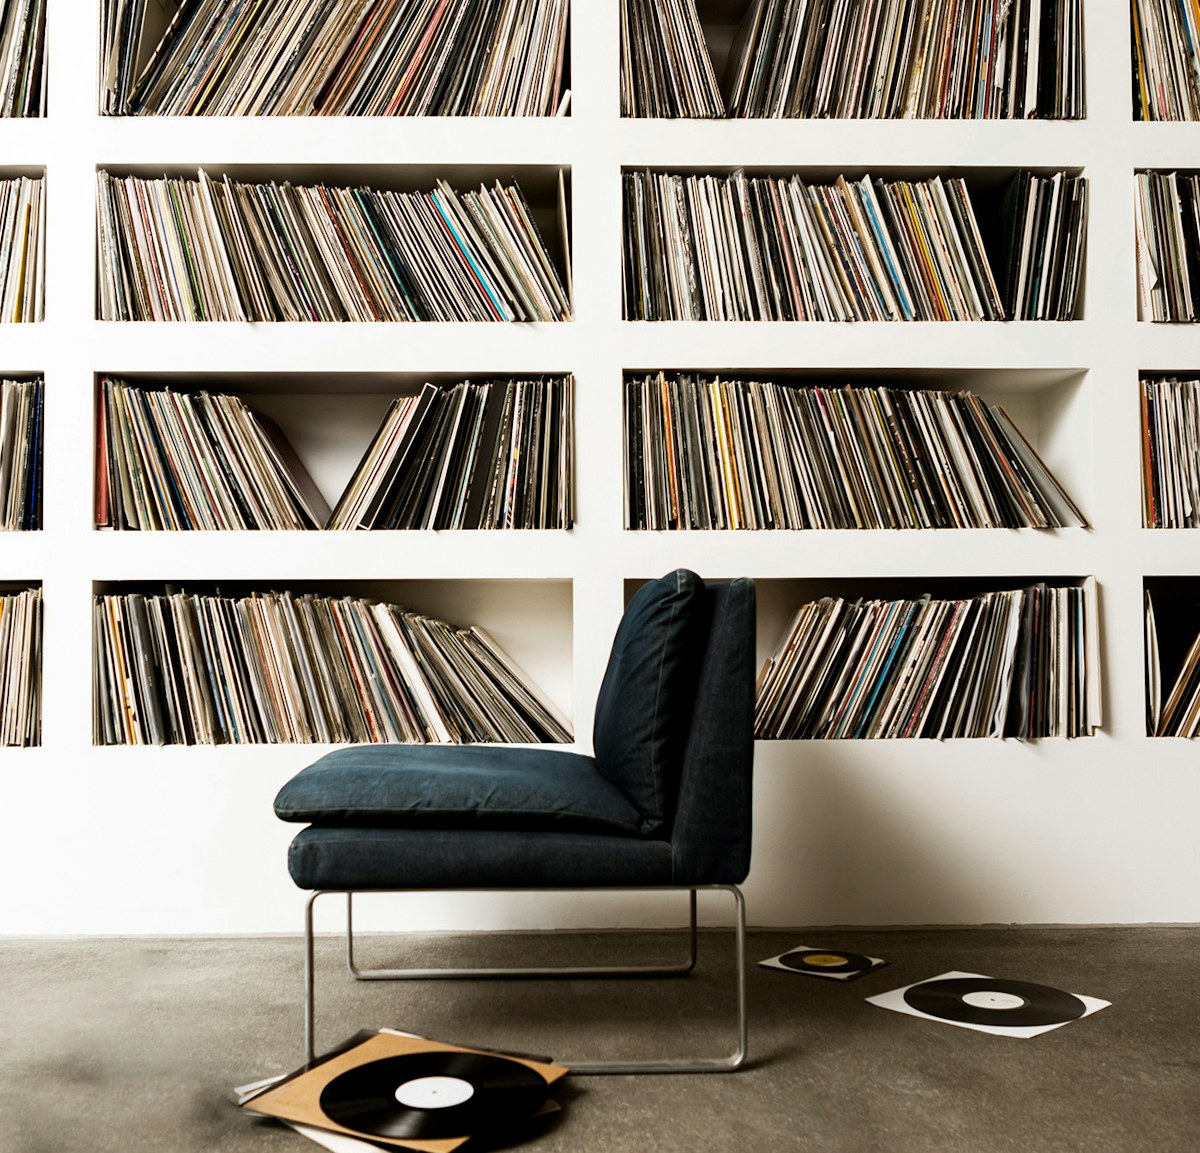 Chair in front of record collection mobile